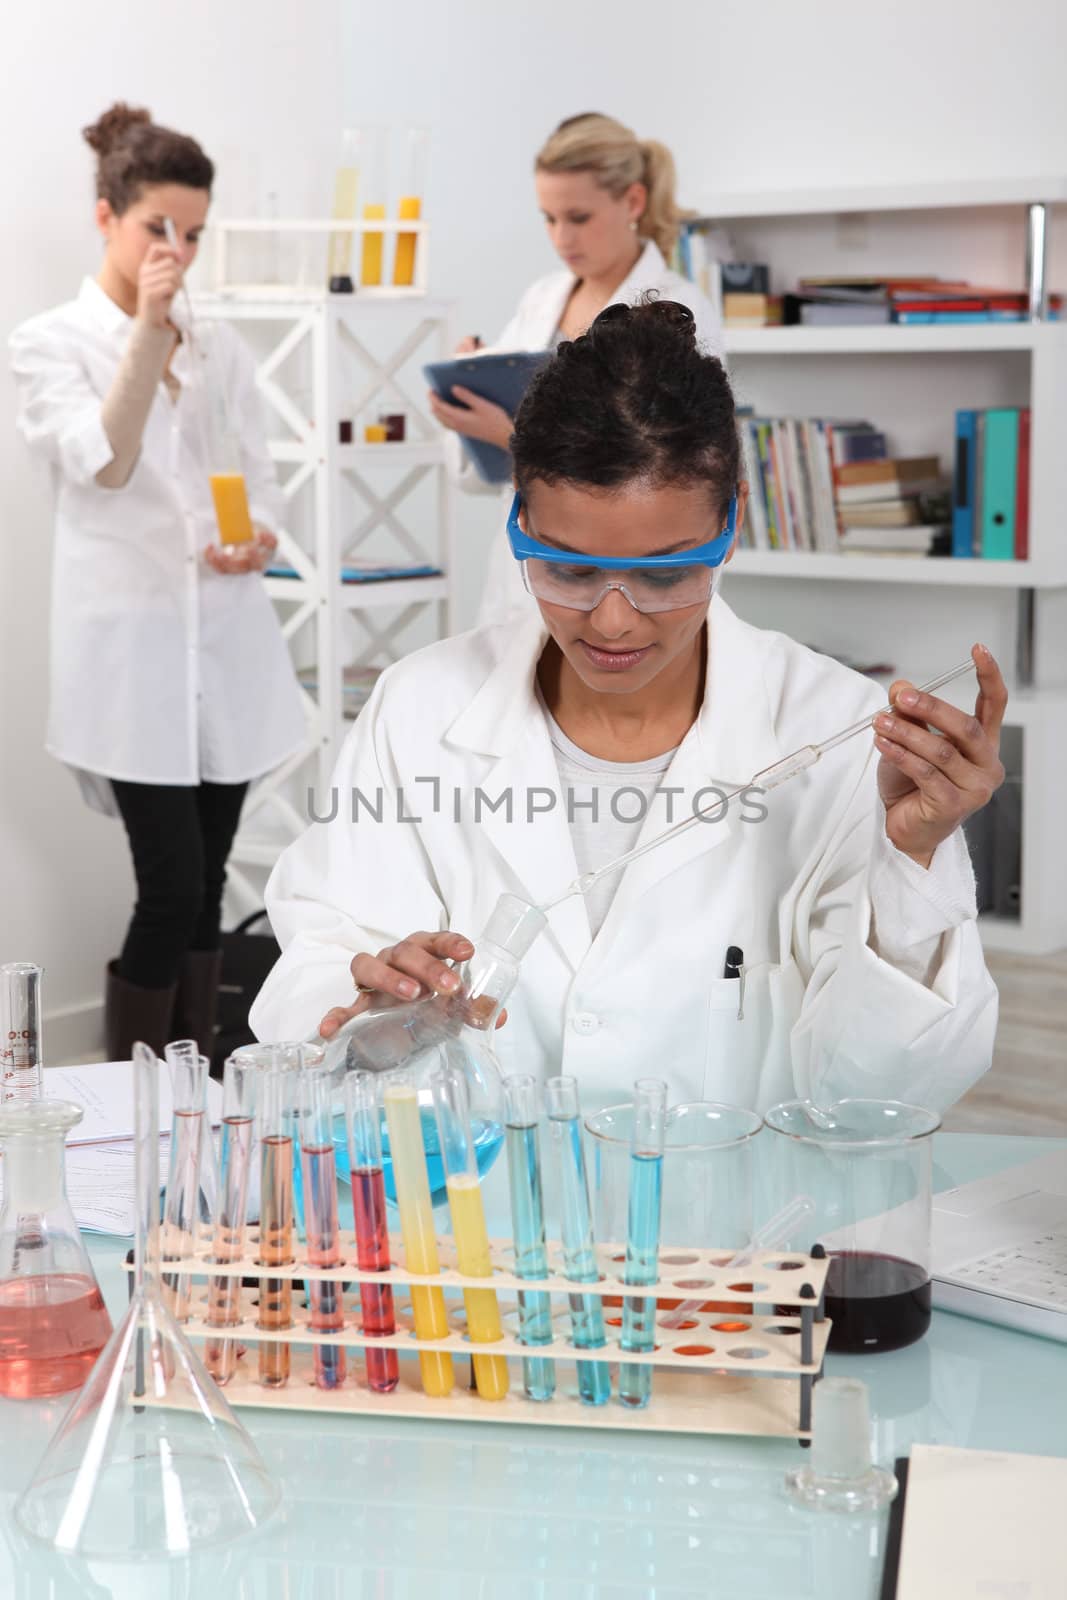 Students in a science lab by phovoir